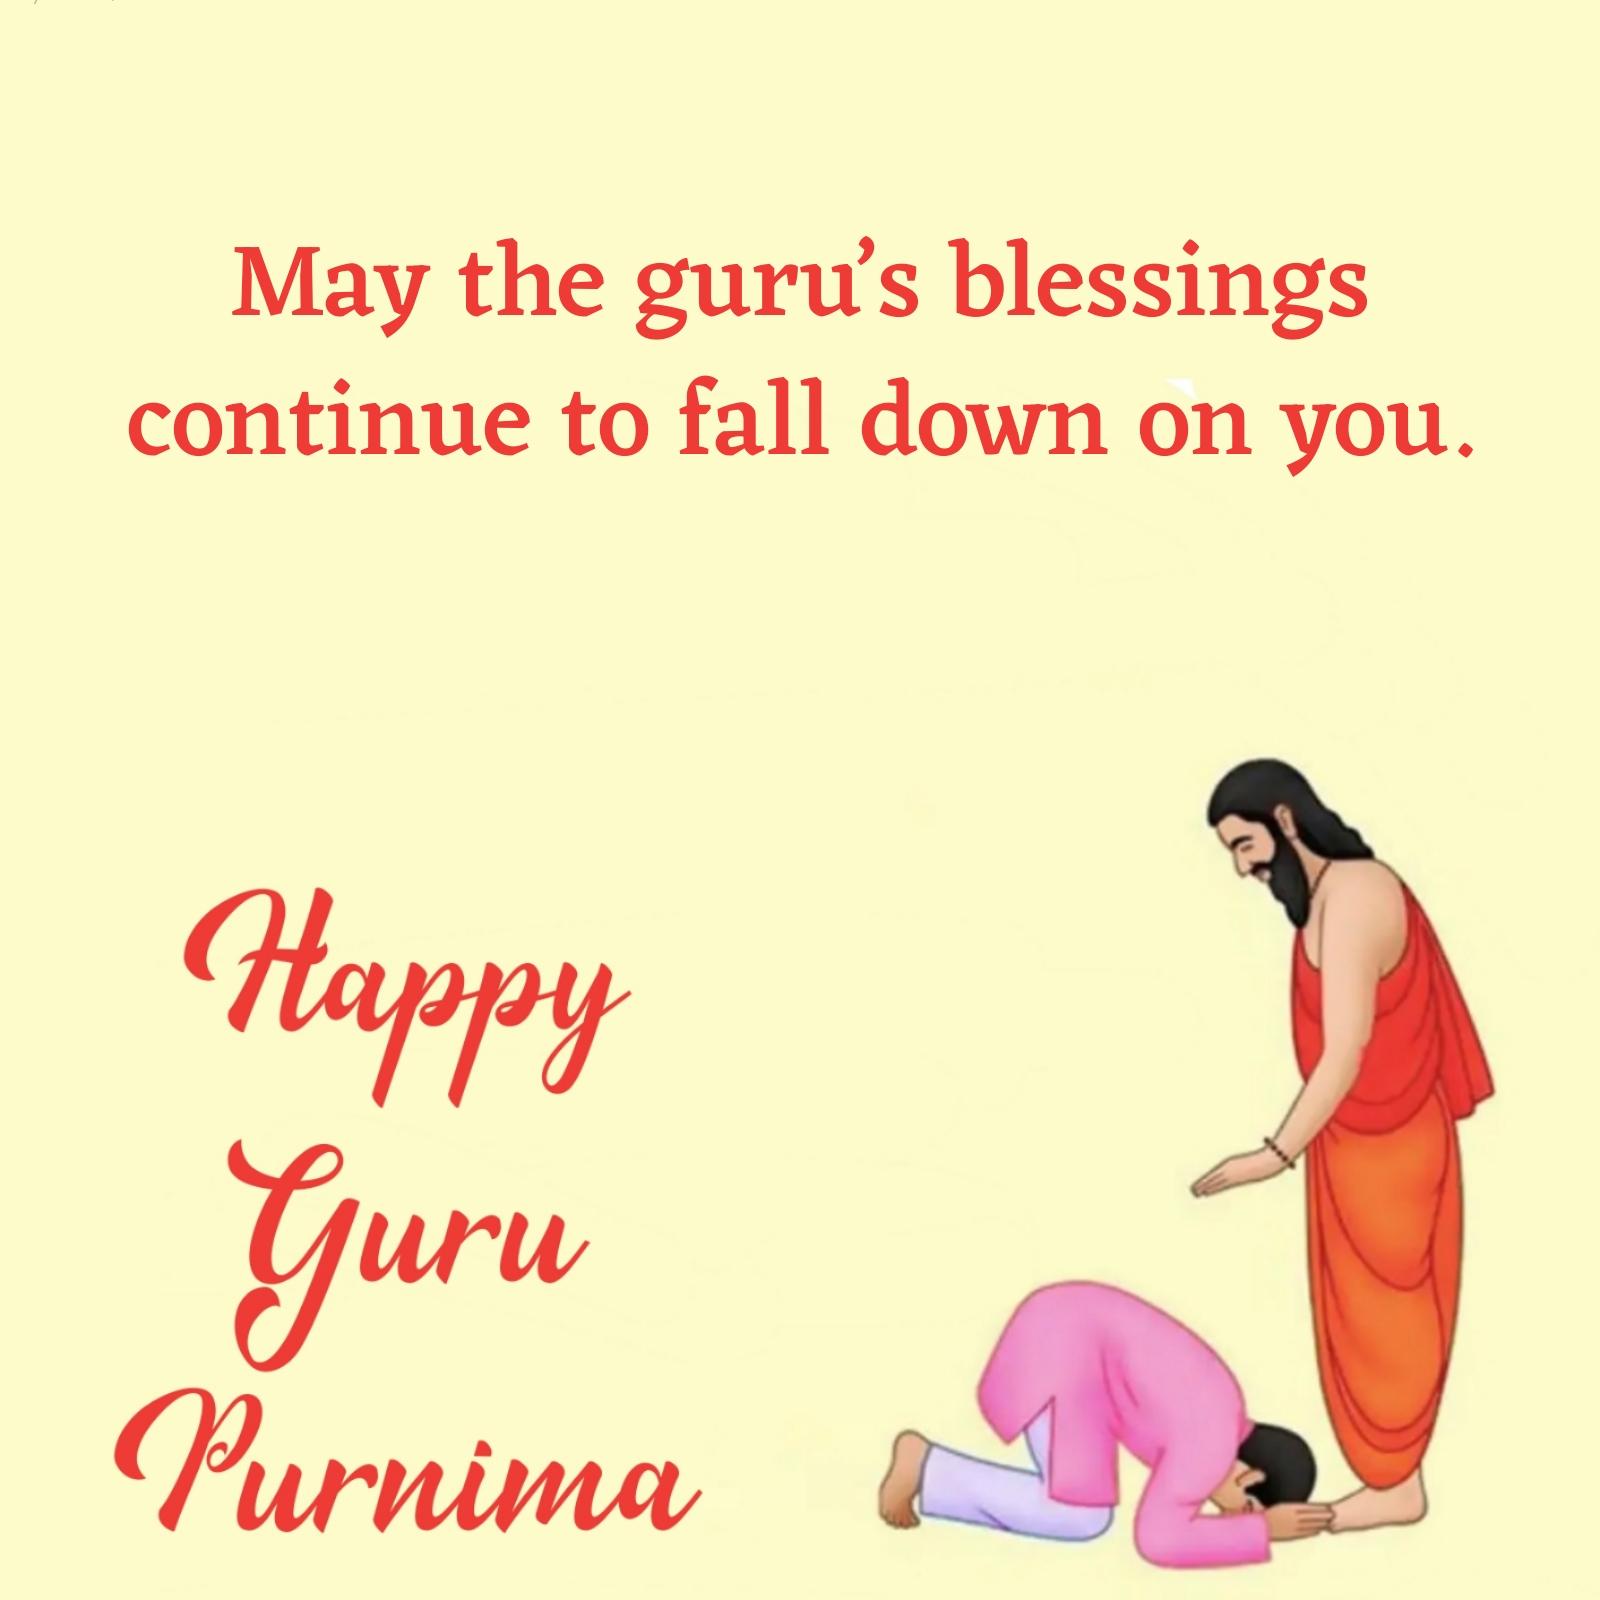 May the gurus blessings continue to fall down on you